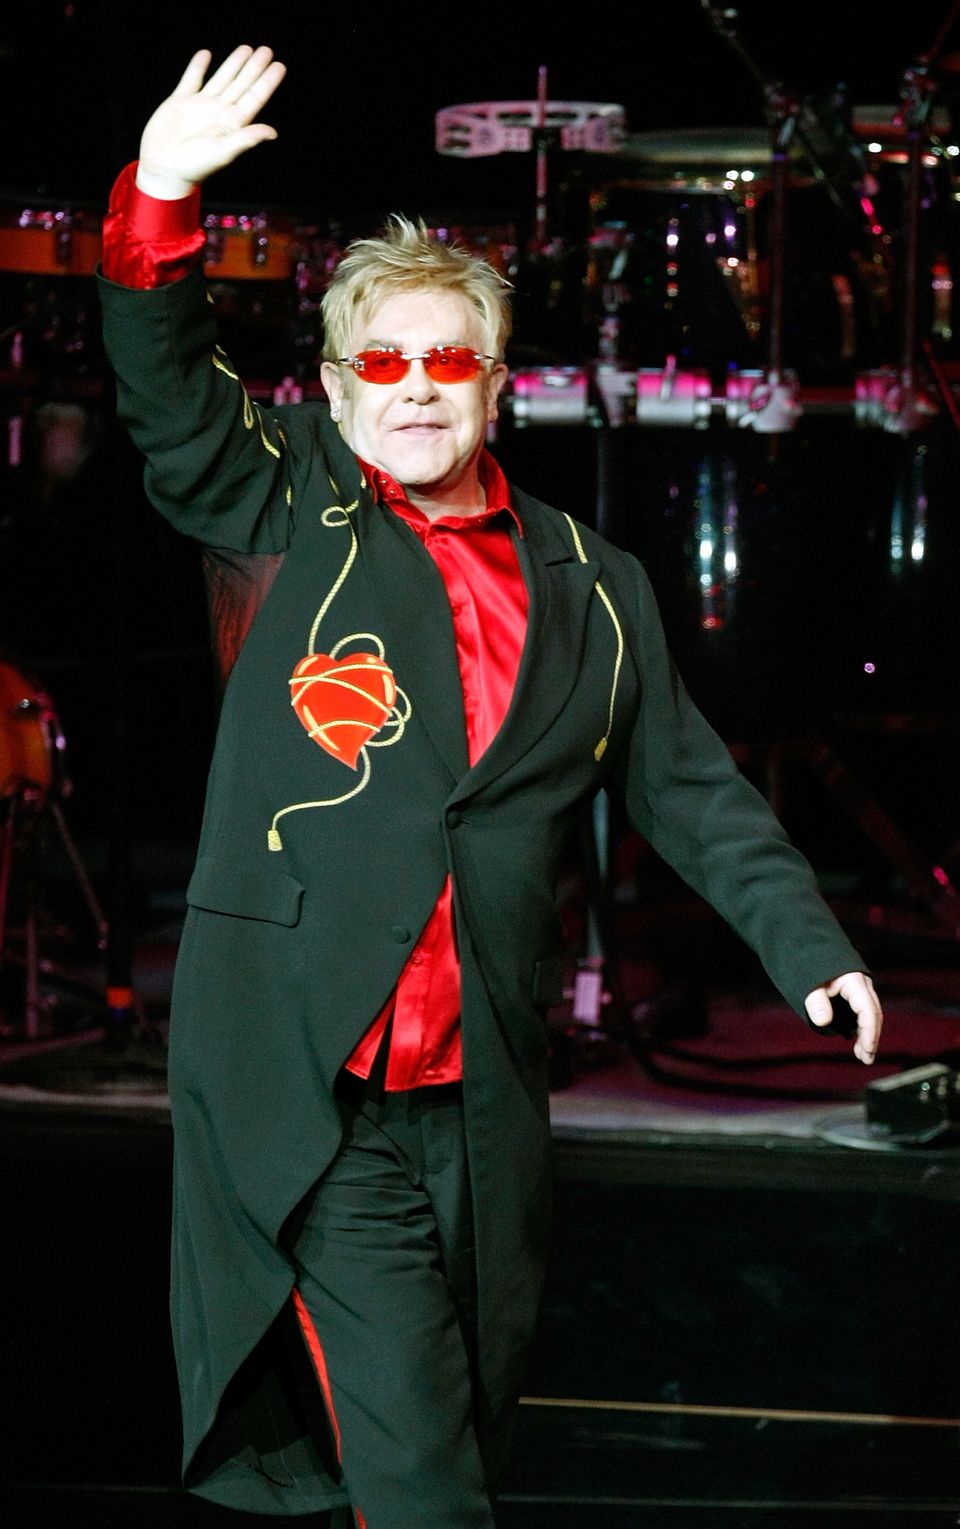 Elton John's Most Gloriously Over-The-Top Costumes Through The